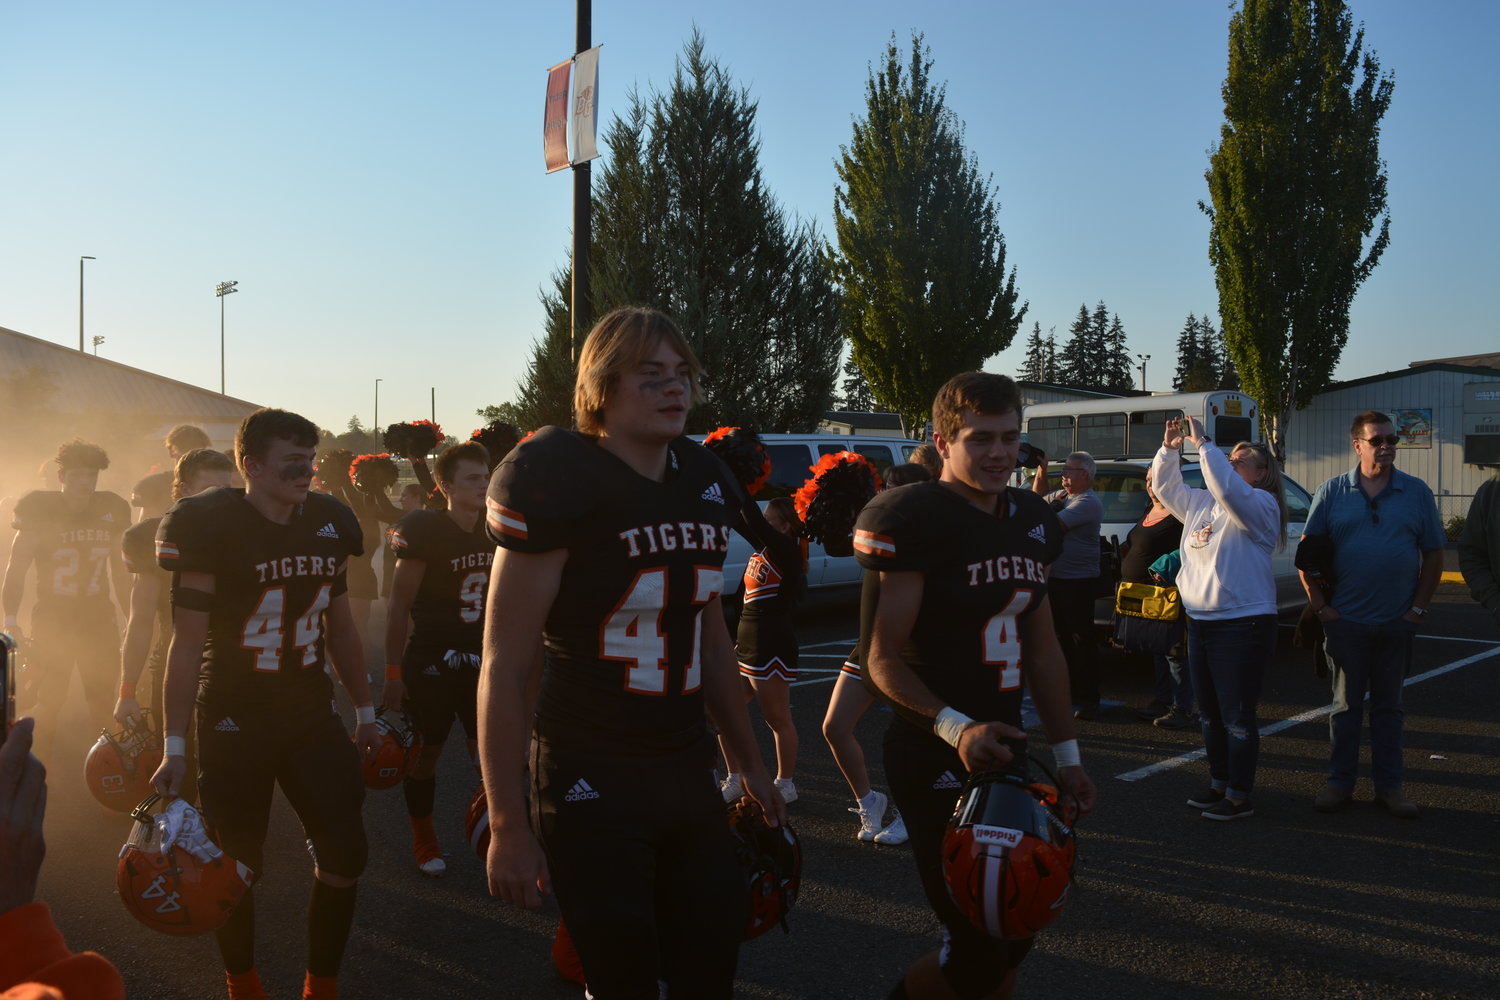 The Battle Ground Tigers walk through the crowd at a celebration marking 100 years of football at the high school on Sept. 30.